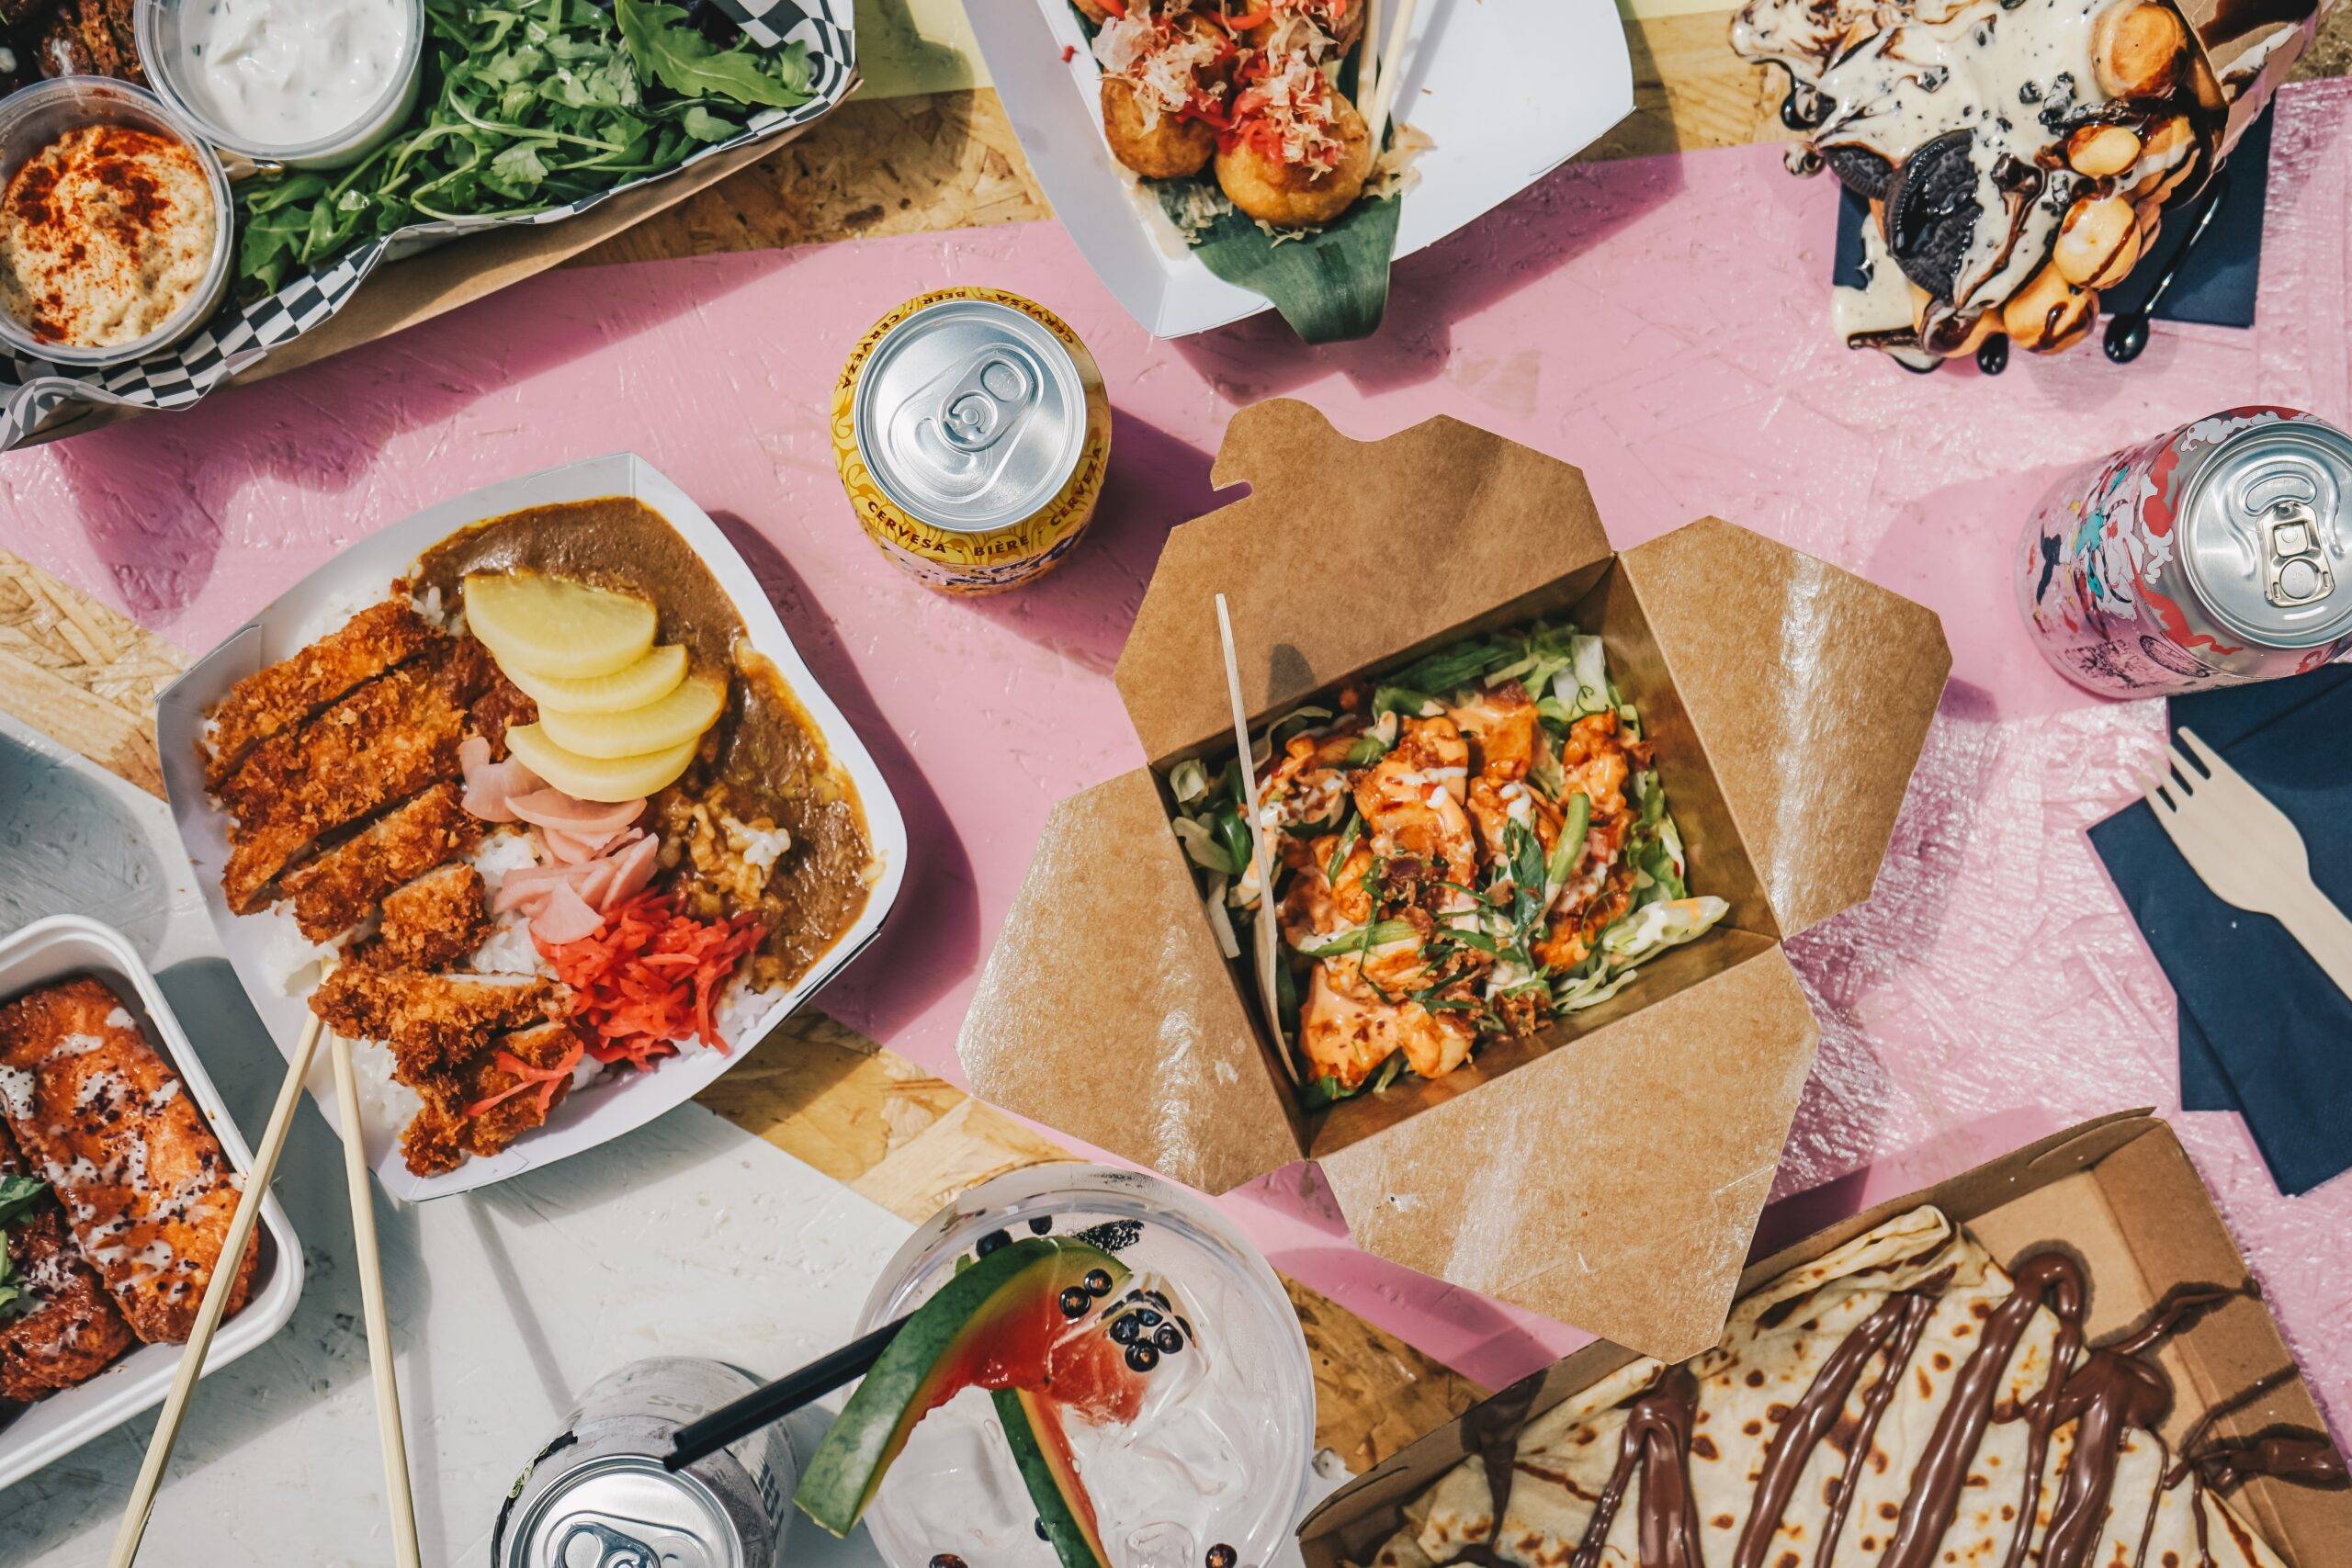 Classic Chinese Takeout Dishes With An Amazing Twist